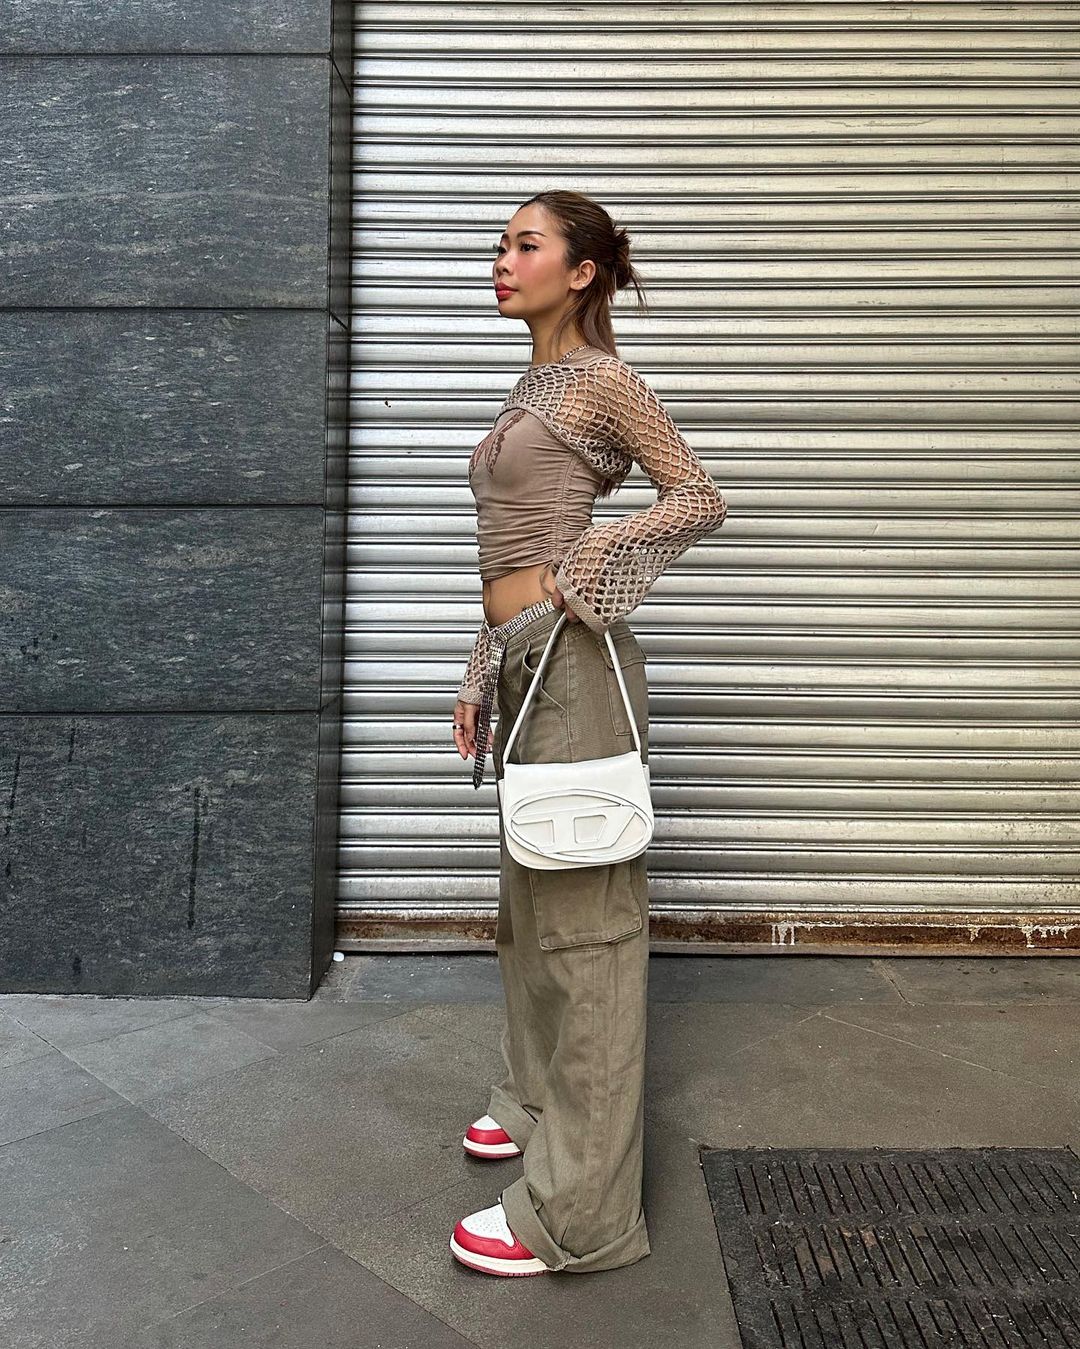 Cargo Pants Trend: 7 Styles To Shop for Spring